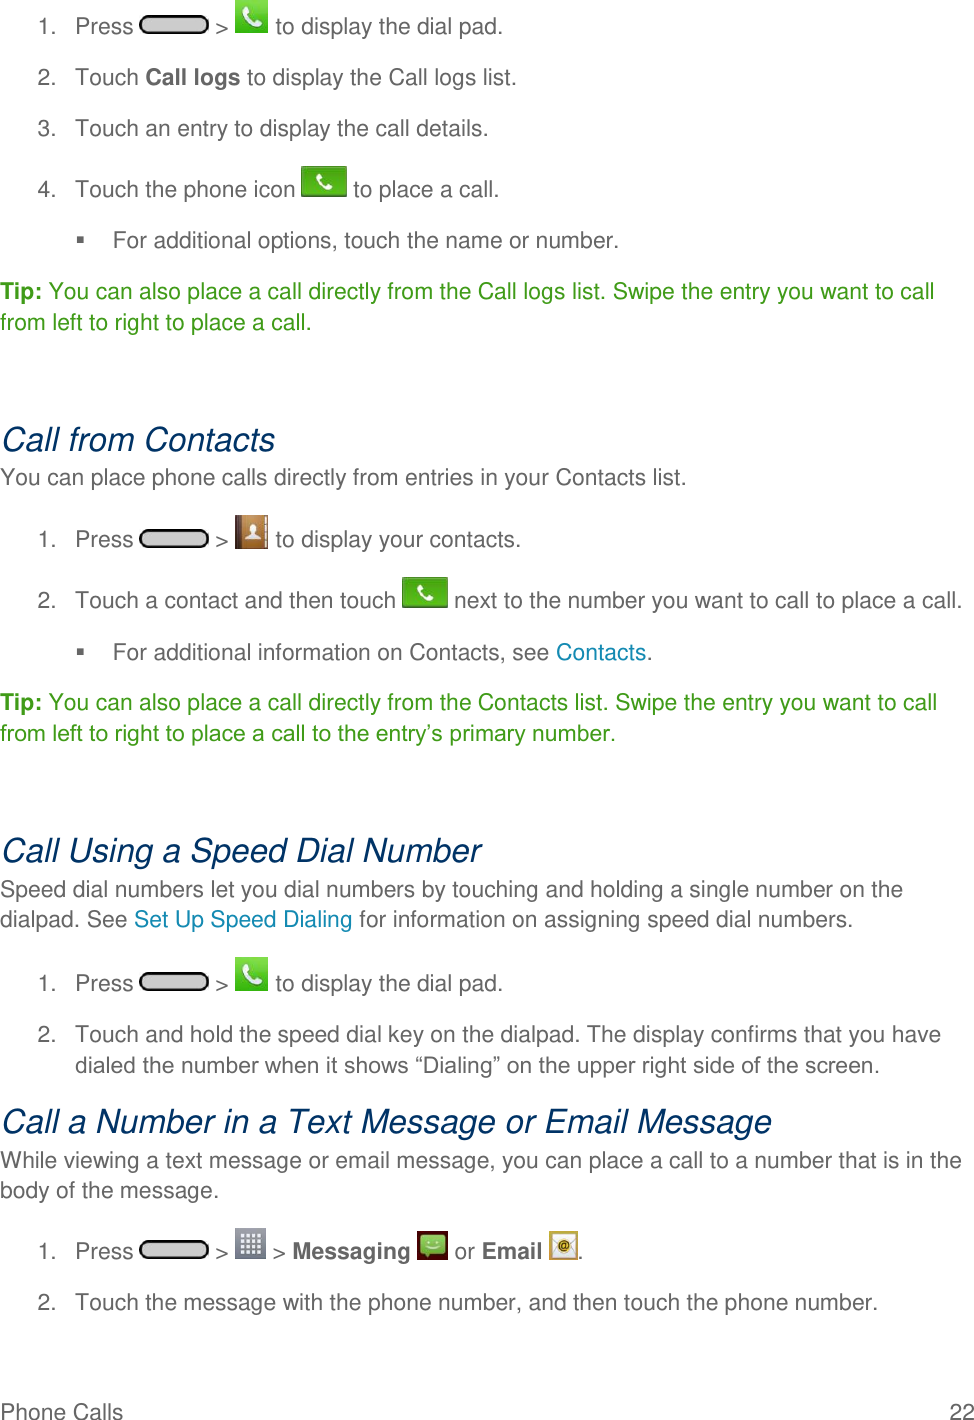 Phone Calls  22 1.  Press   &gt;   to display the dial pad. 2.  Touch Call logs to display the Call logs list. 3.  Touch an entry to display the call details. 4.  Touch the phone icon   to place a call.   For additional options, touch the name or number. Tip: You can also place a call directly from the Call logs list. Swipe the entry you want to call from left to right to place a call.   Call from Contacts You can place phone calls directly from entries in your Contacts list. 1.  Press   &gt;   to display your contacts. 2.  Touch a contact and then touch   next to the number you want to call to place a call.   For additional information on Contacts, see Contacts. Tip: You can also place a call directly from the Contacts list. Swipe the entry you want to call from left to right to place a call to the entry‘s primary number.   Call Using a Speed Dial Number Speed dial numbers let you dial numbers by touching and holding a single number on the dialpad. See Set Up Speed Dialing for information on assigning speed dial numbers. 1.  Press   &gt;   to display the dial pad. 2.  Touch and hold the speed dial key on the dialpad. The display confirms that you have dialed the number when it shows ―Dialing‖ on the upper right side of the screen. Call a Number in a Text Message or Email Message While viewing a text message or email message, you can place a call to a number that is in the body of the message.  1.  Press   &gt;   &gt; Messaging   or Email  . 2.  Touch the message with the phone number, and then touch the phone number. 